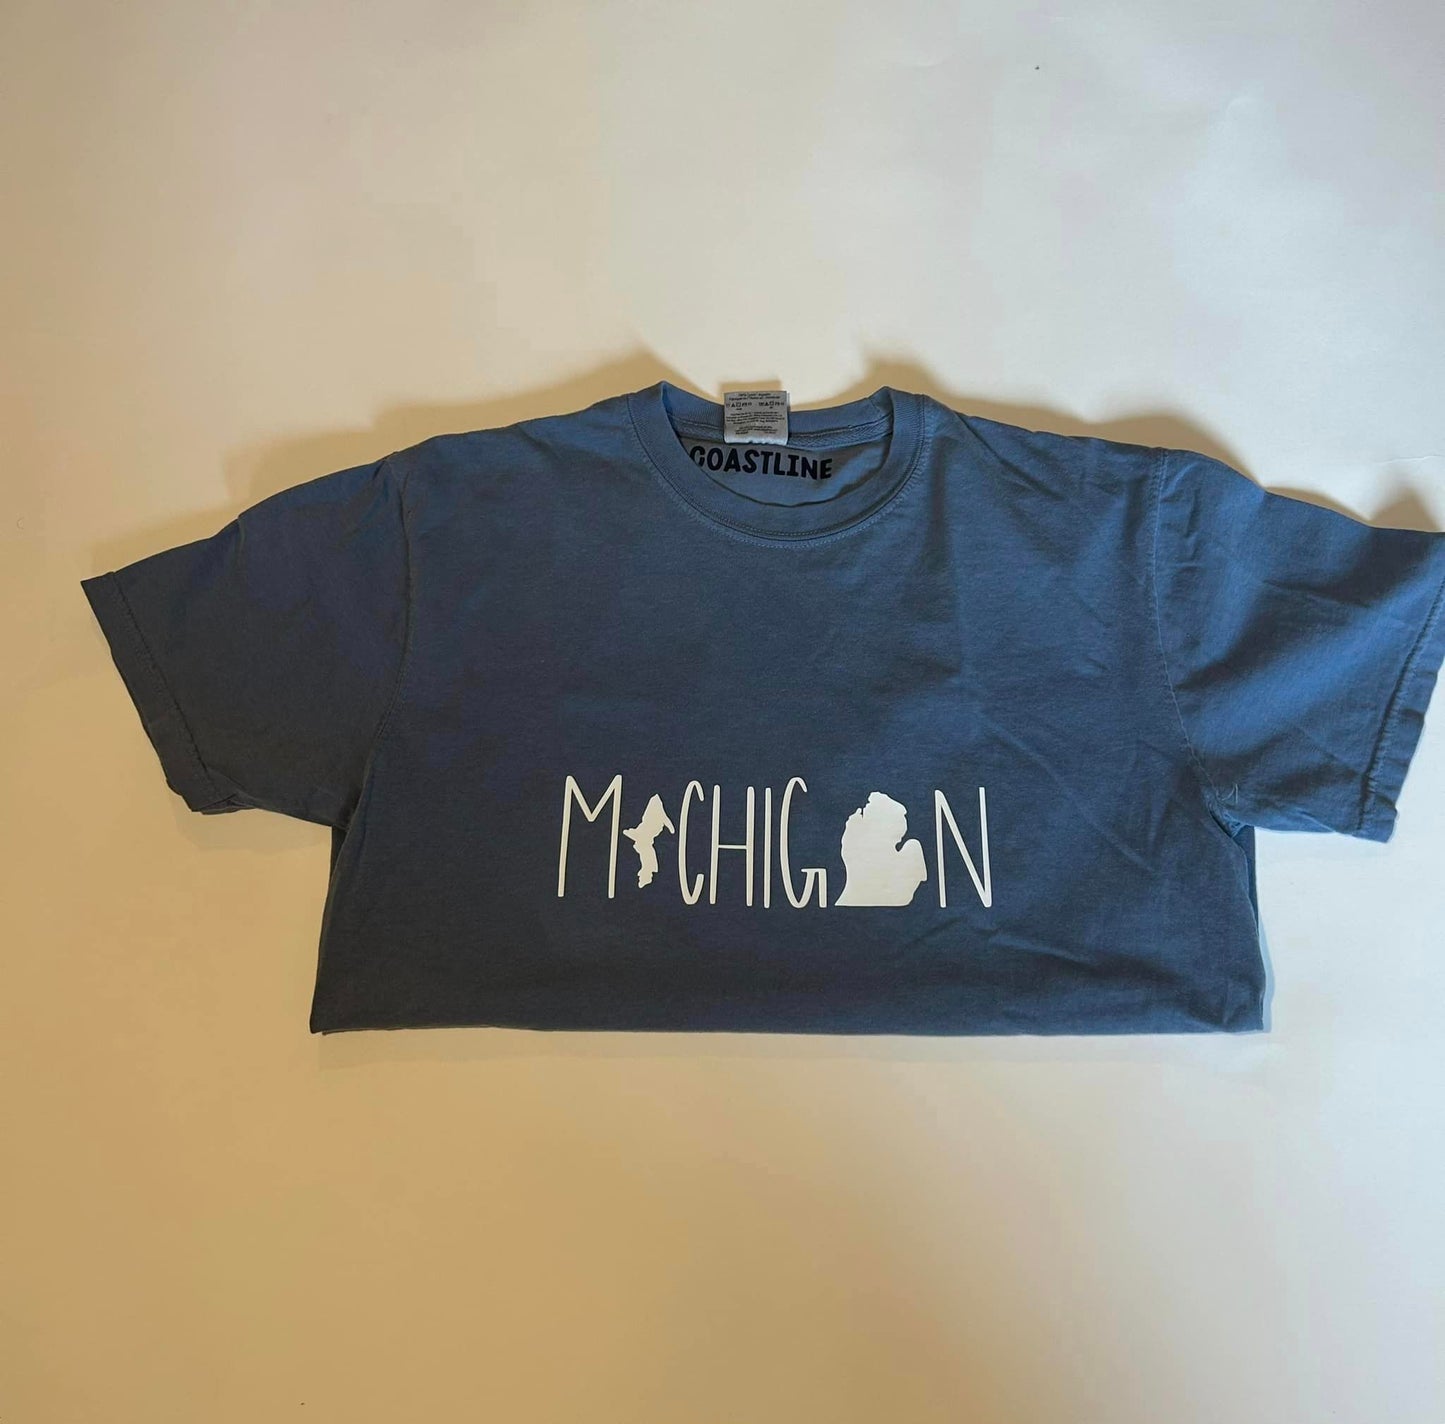 Michigan Tee with State Shapes